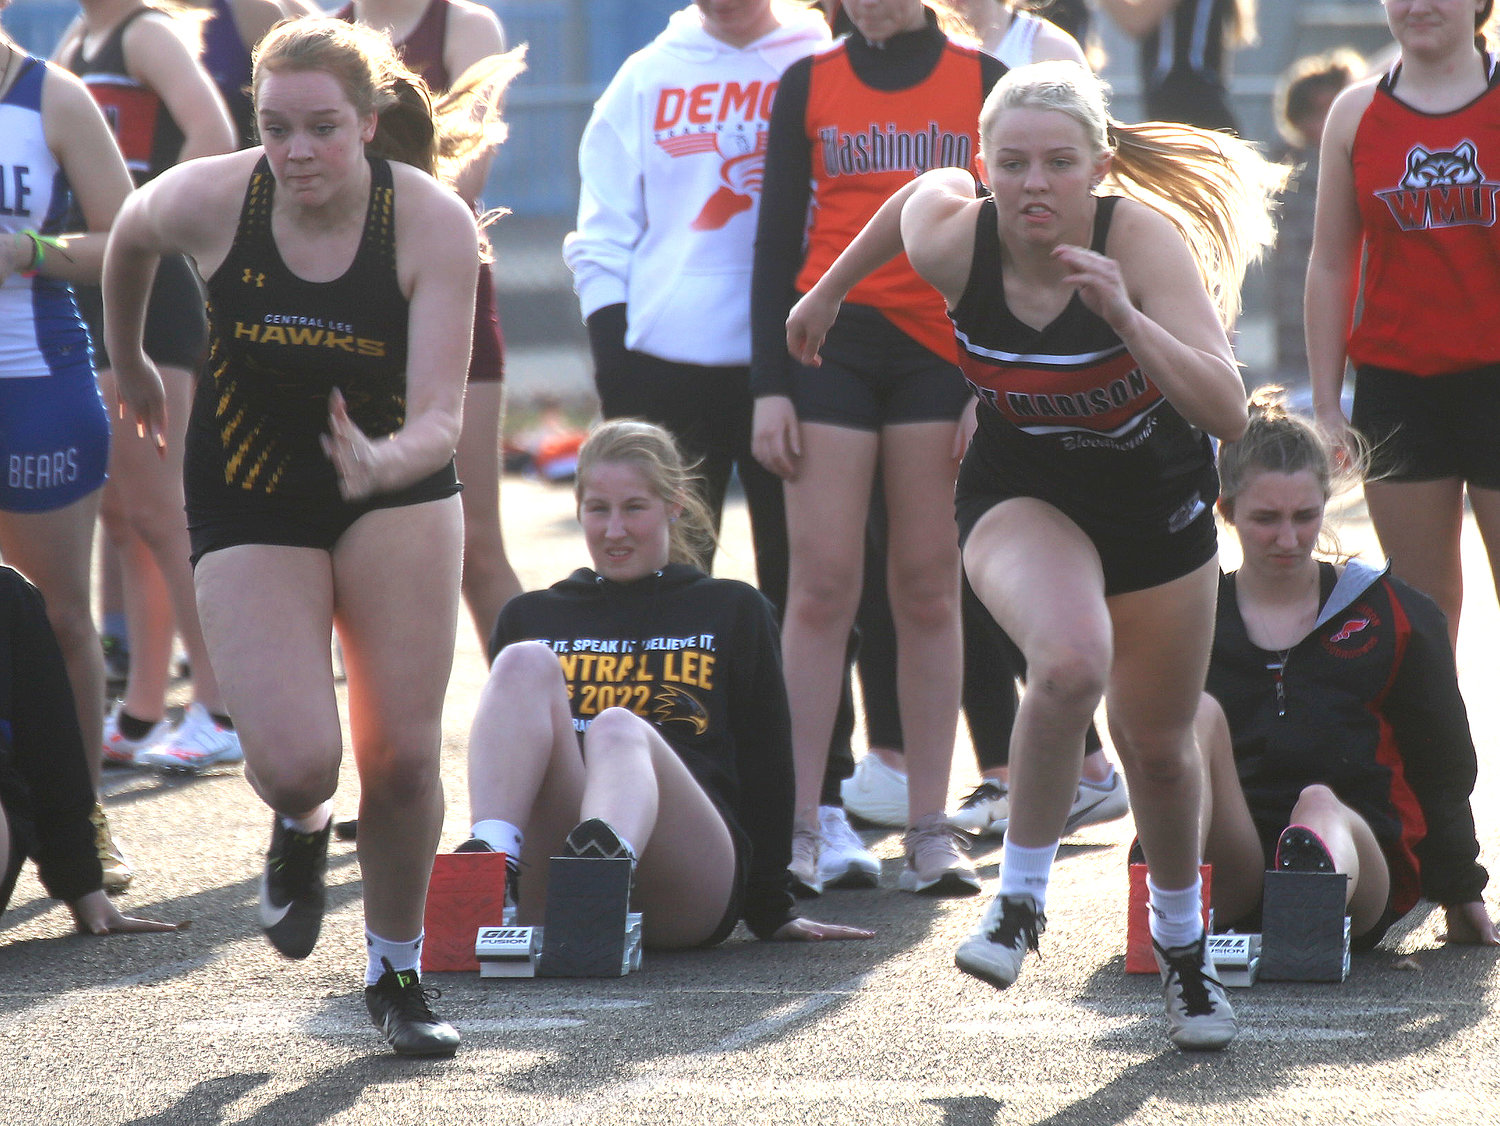 From left Central Lee's Allison Kerr and Fort Madison's Emily Steffensmeier take off in the 2nd heat of the 100-meter dash. Steffensmeier would win the heat at 14.60 and finish 11th in the event at the Timm Lamb Pen City Relays in Fort Madison Tuesday night. Photo by Chuck Vandenberg/PCC